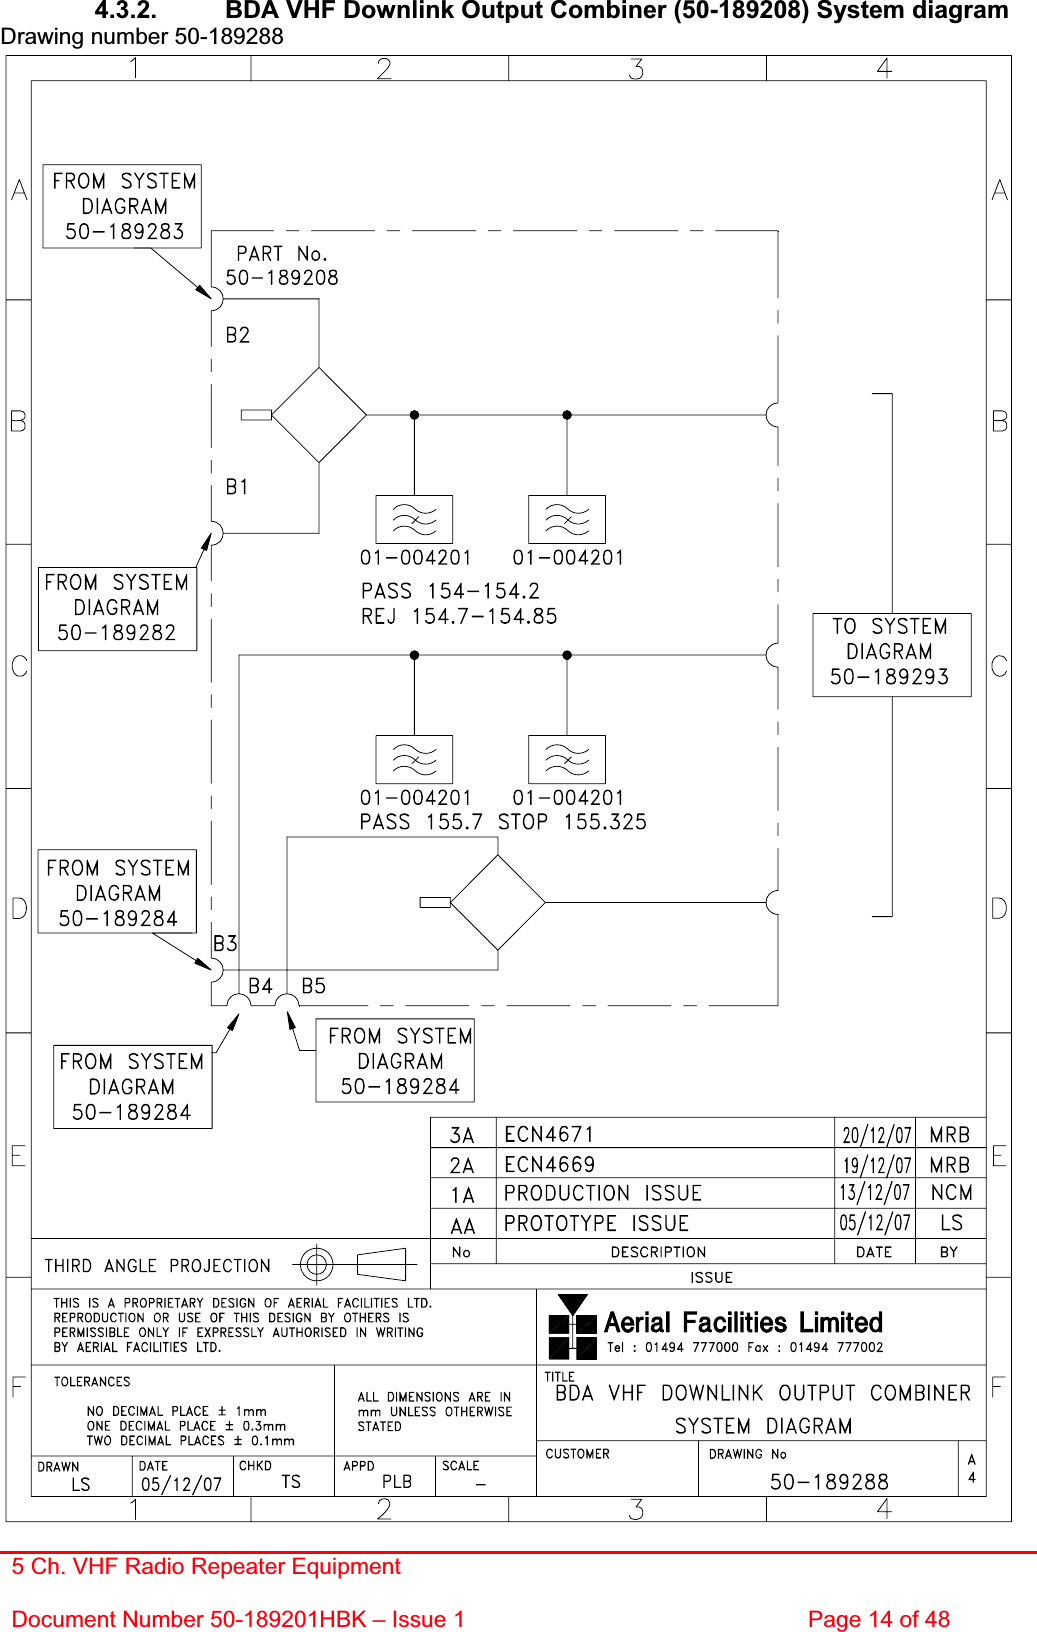 5 Ch. VHF Radio Repeater EquipmentDocument Number 50-189201HBK – Issue 1  Page 14 of 48 4.3.2.  BDA VHF Downlink Output Combiner (50-189208) System diagram Drawing number 50-189288 